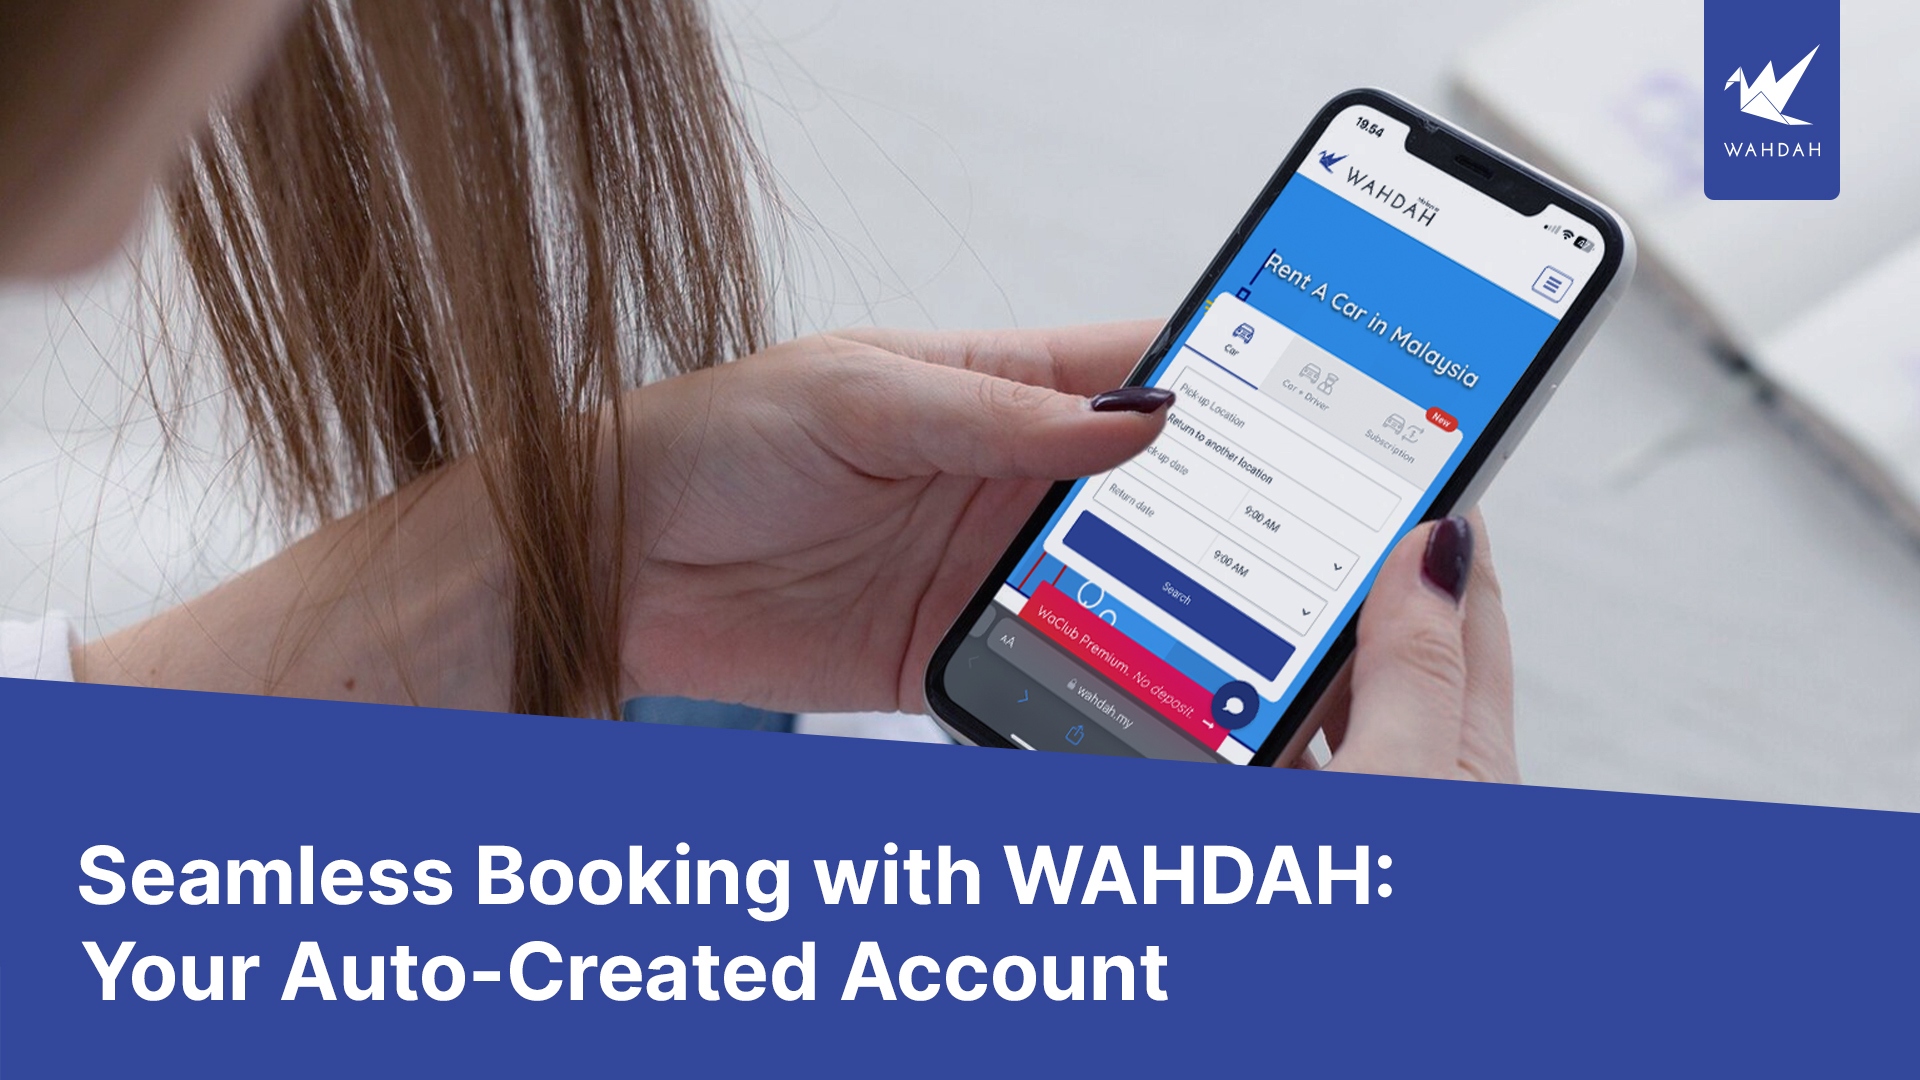 Seamless Booking with WAHDAH: Your Auto-Created Account